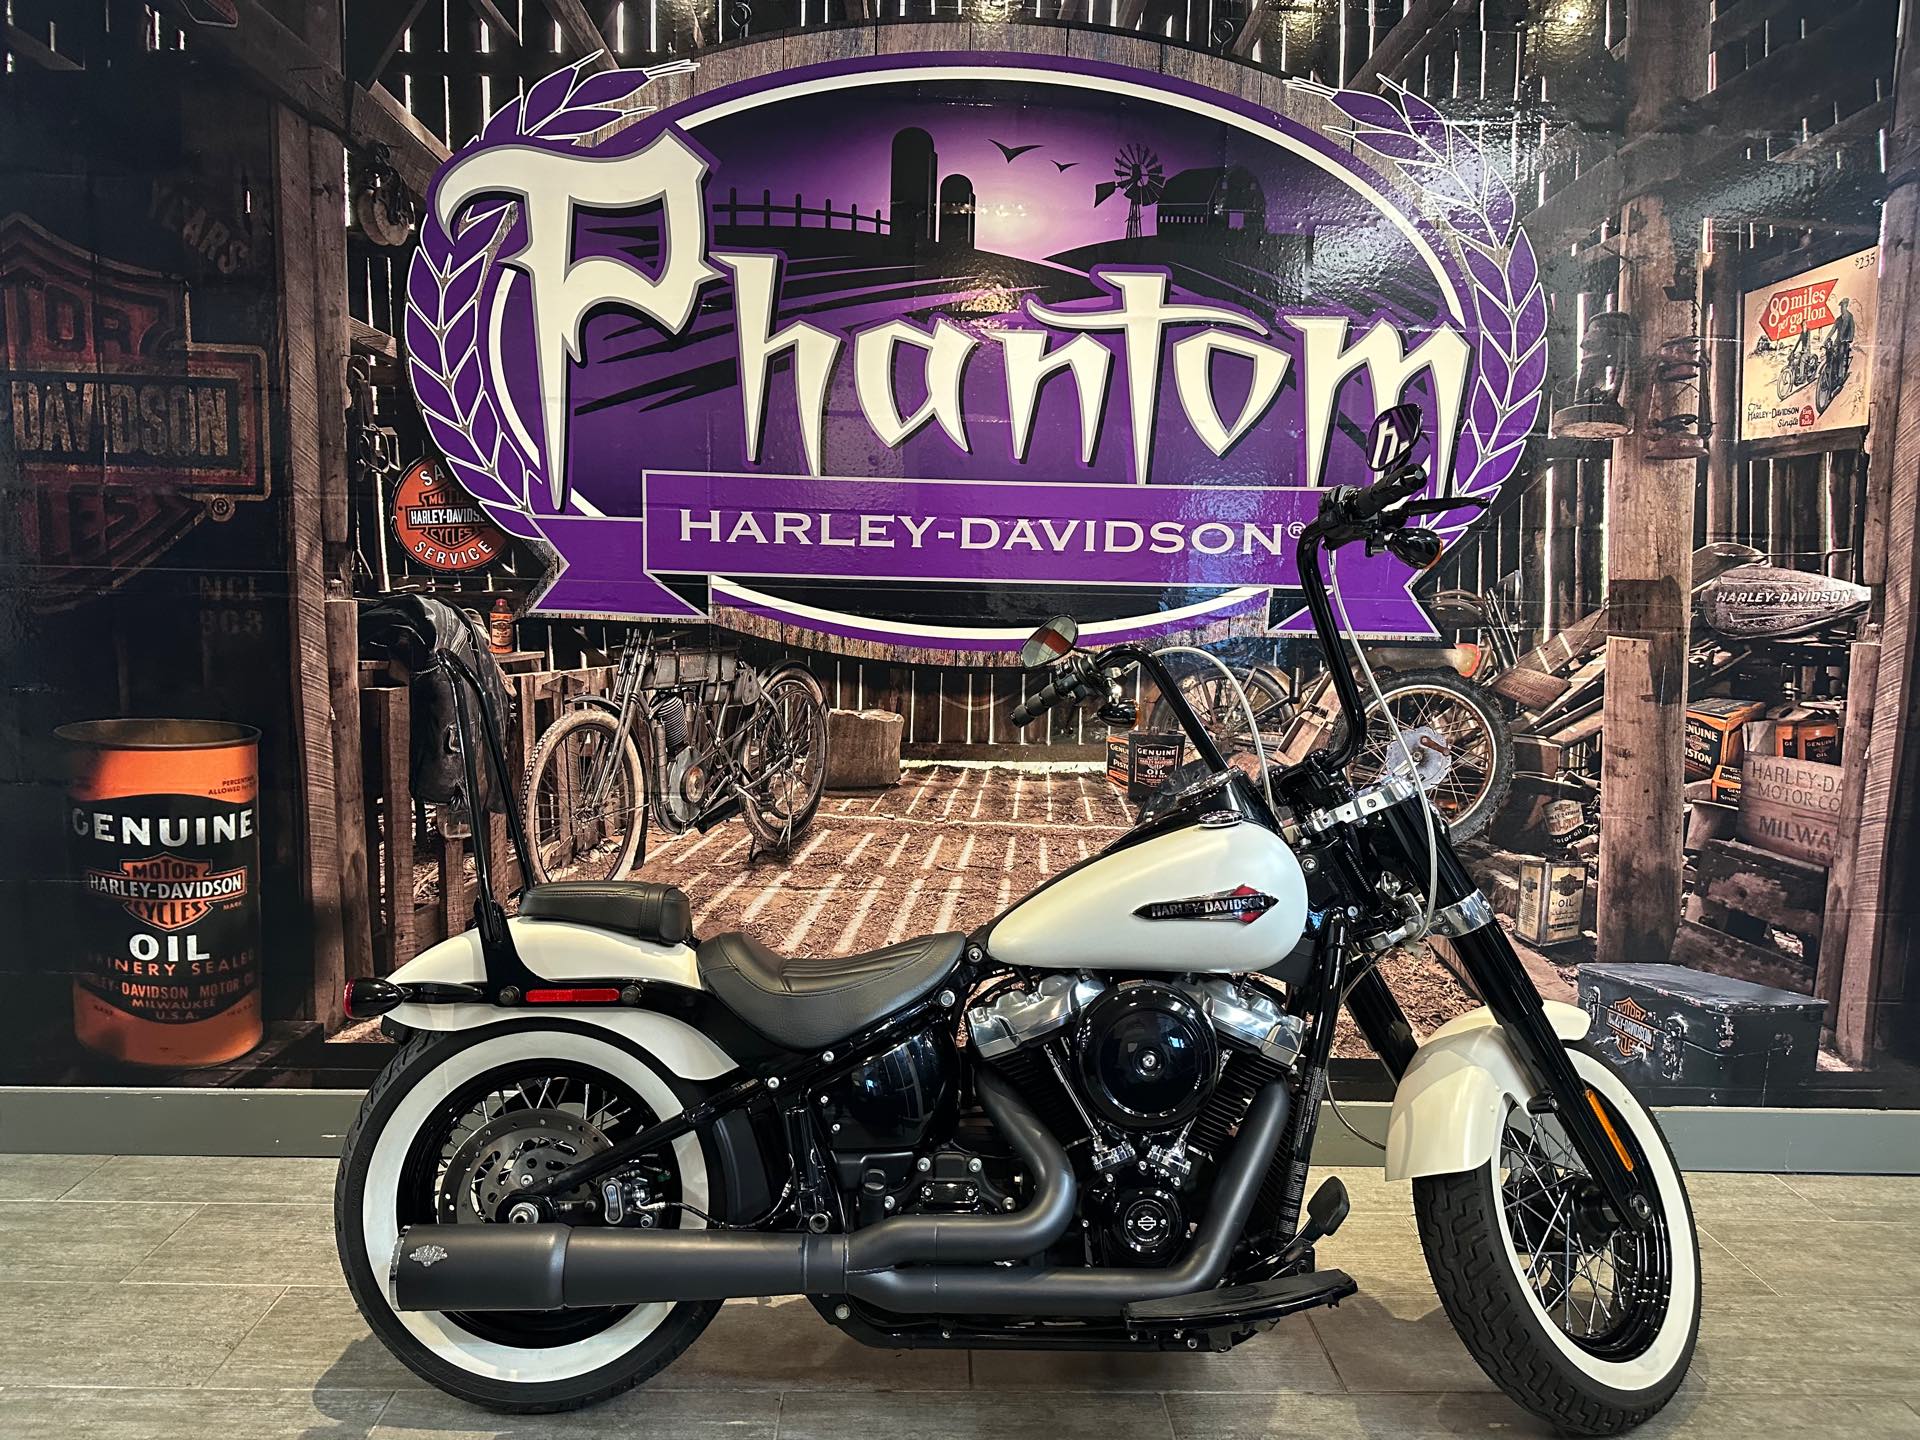 Our Pre-Owned Harley-Davidson cruiser Inventory